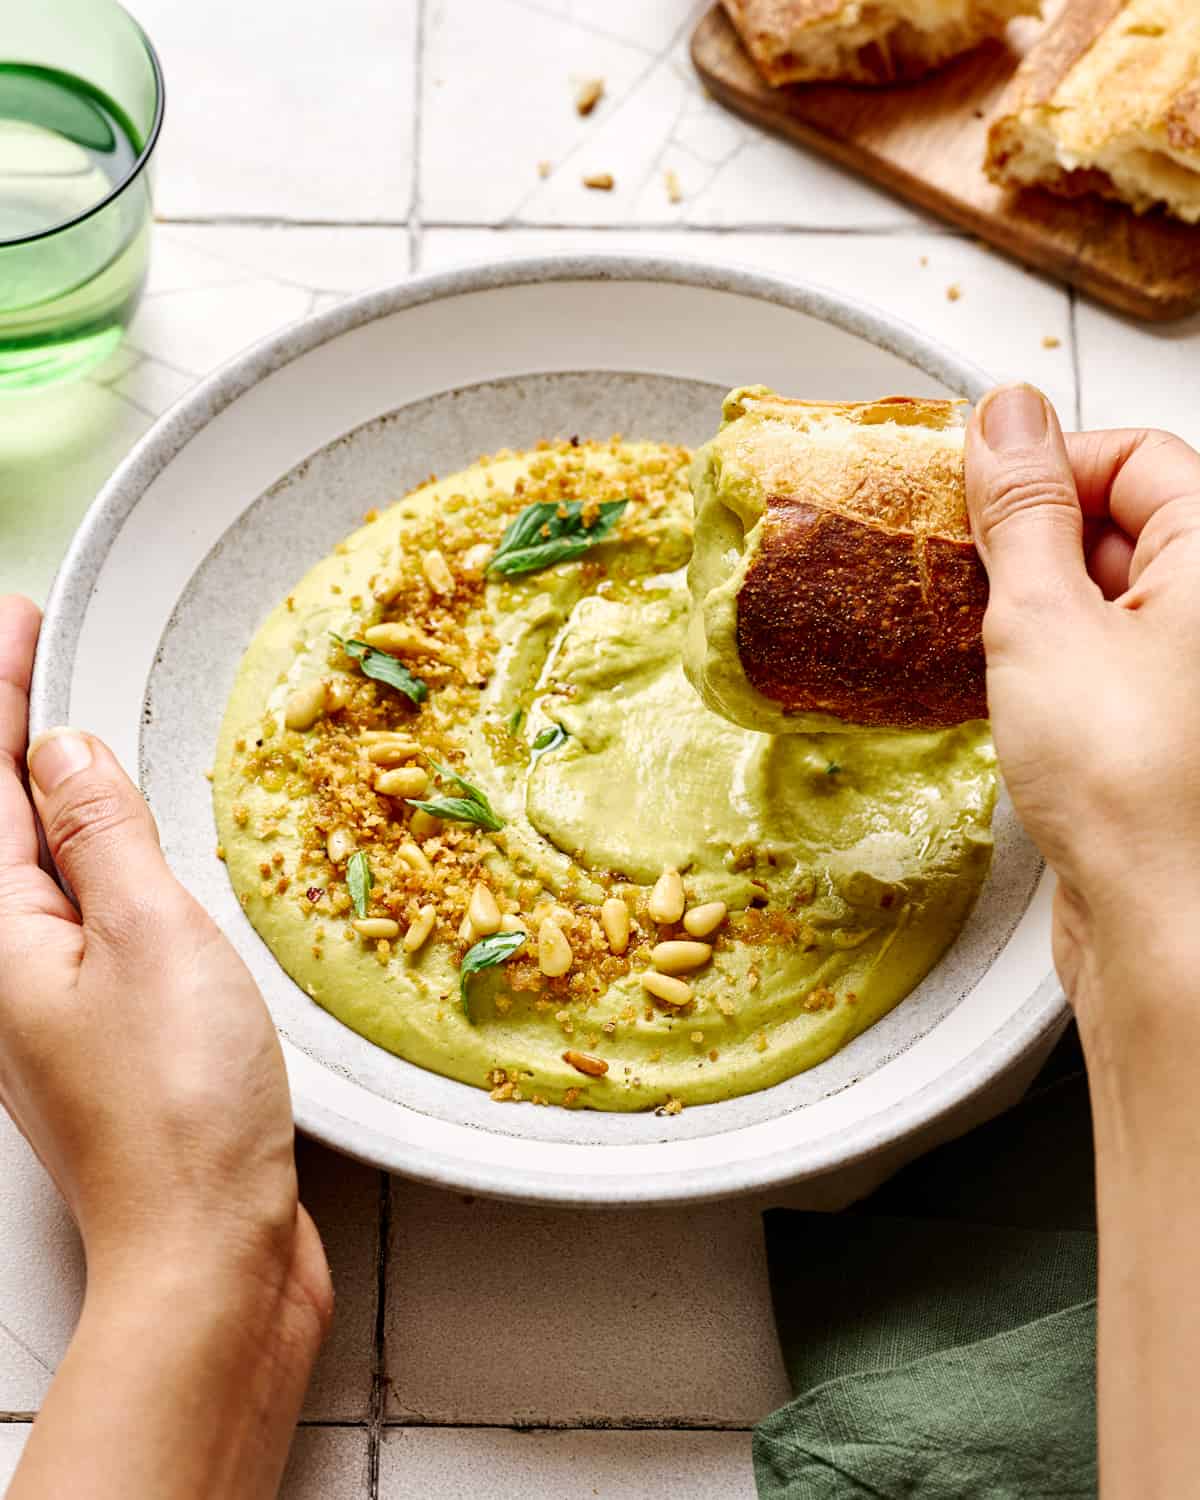 Person holding bowl while dipping chunk of bread into broccoli soup in white bowl.